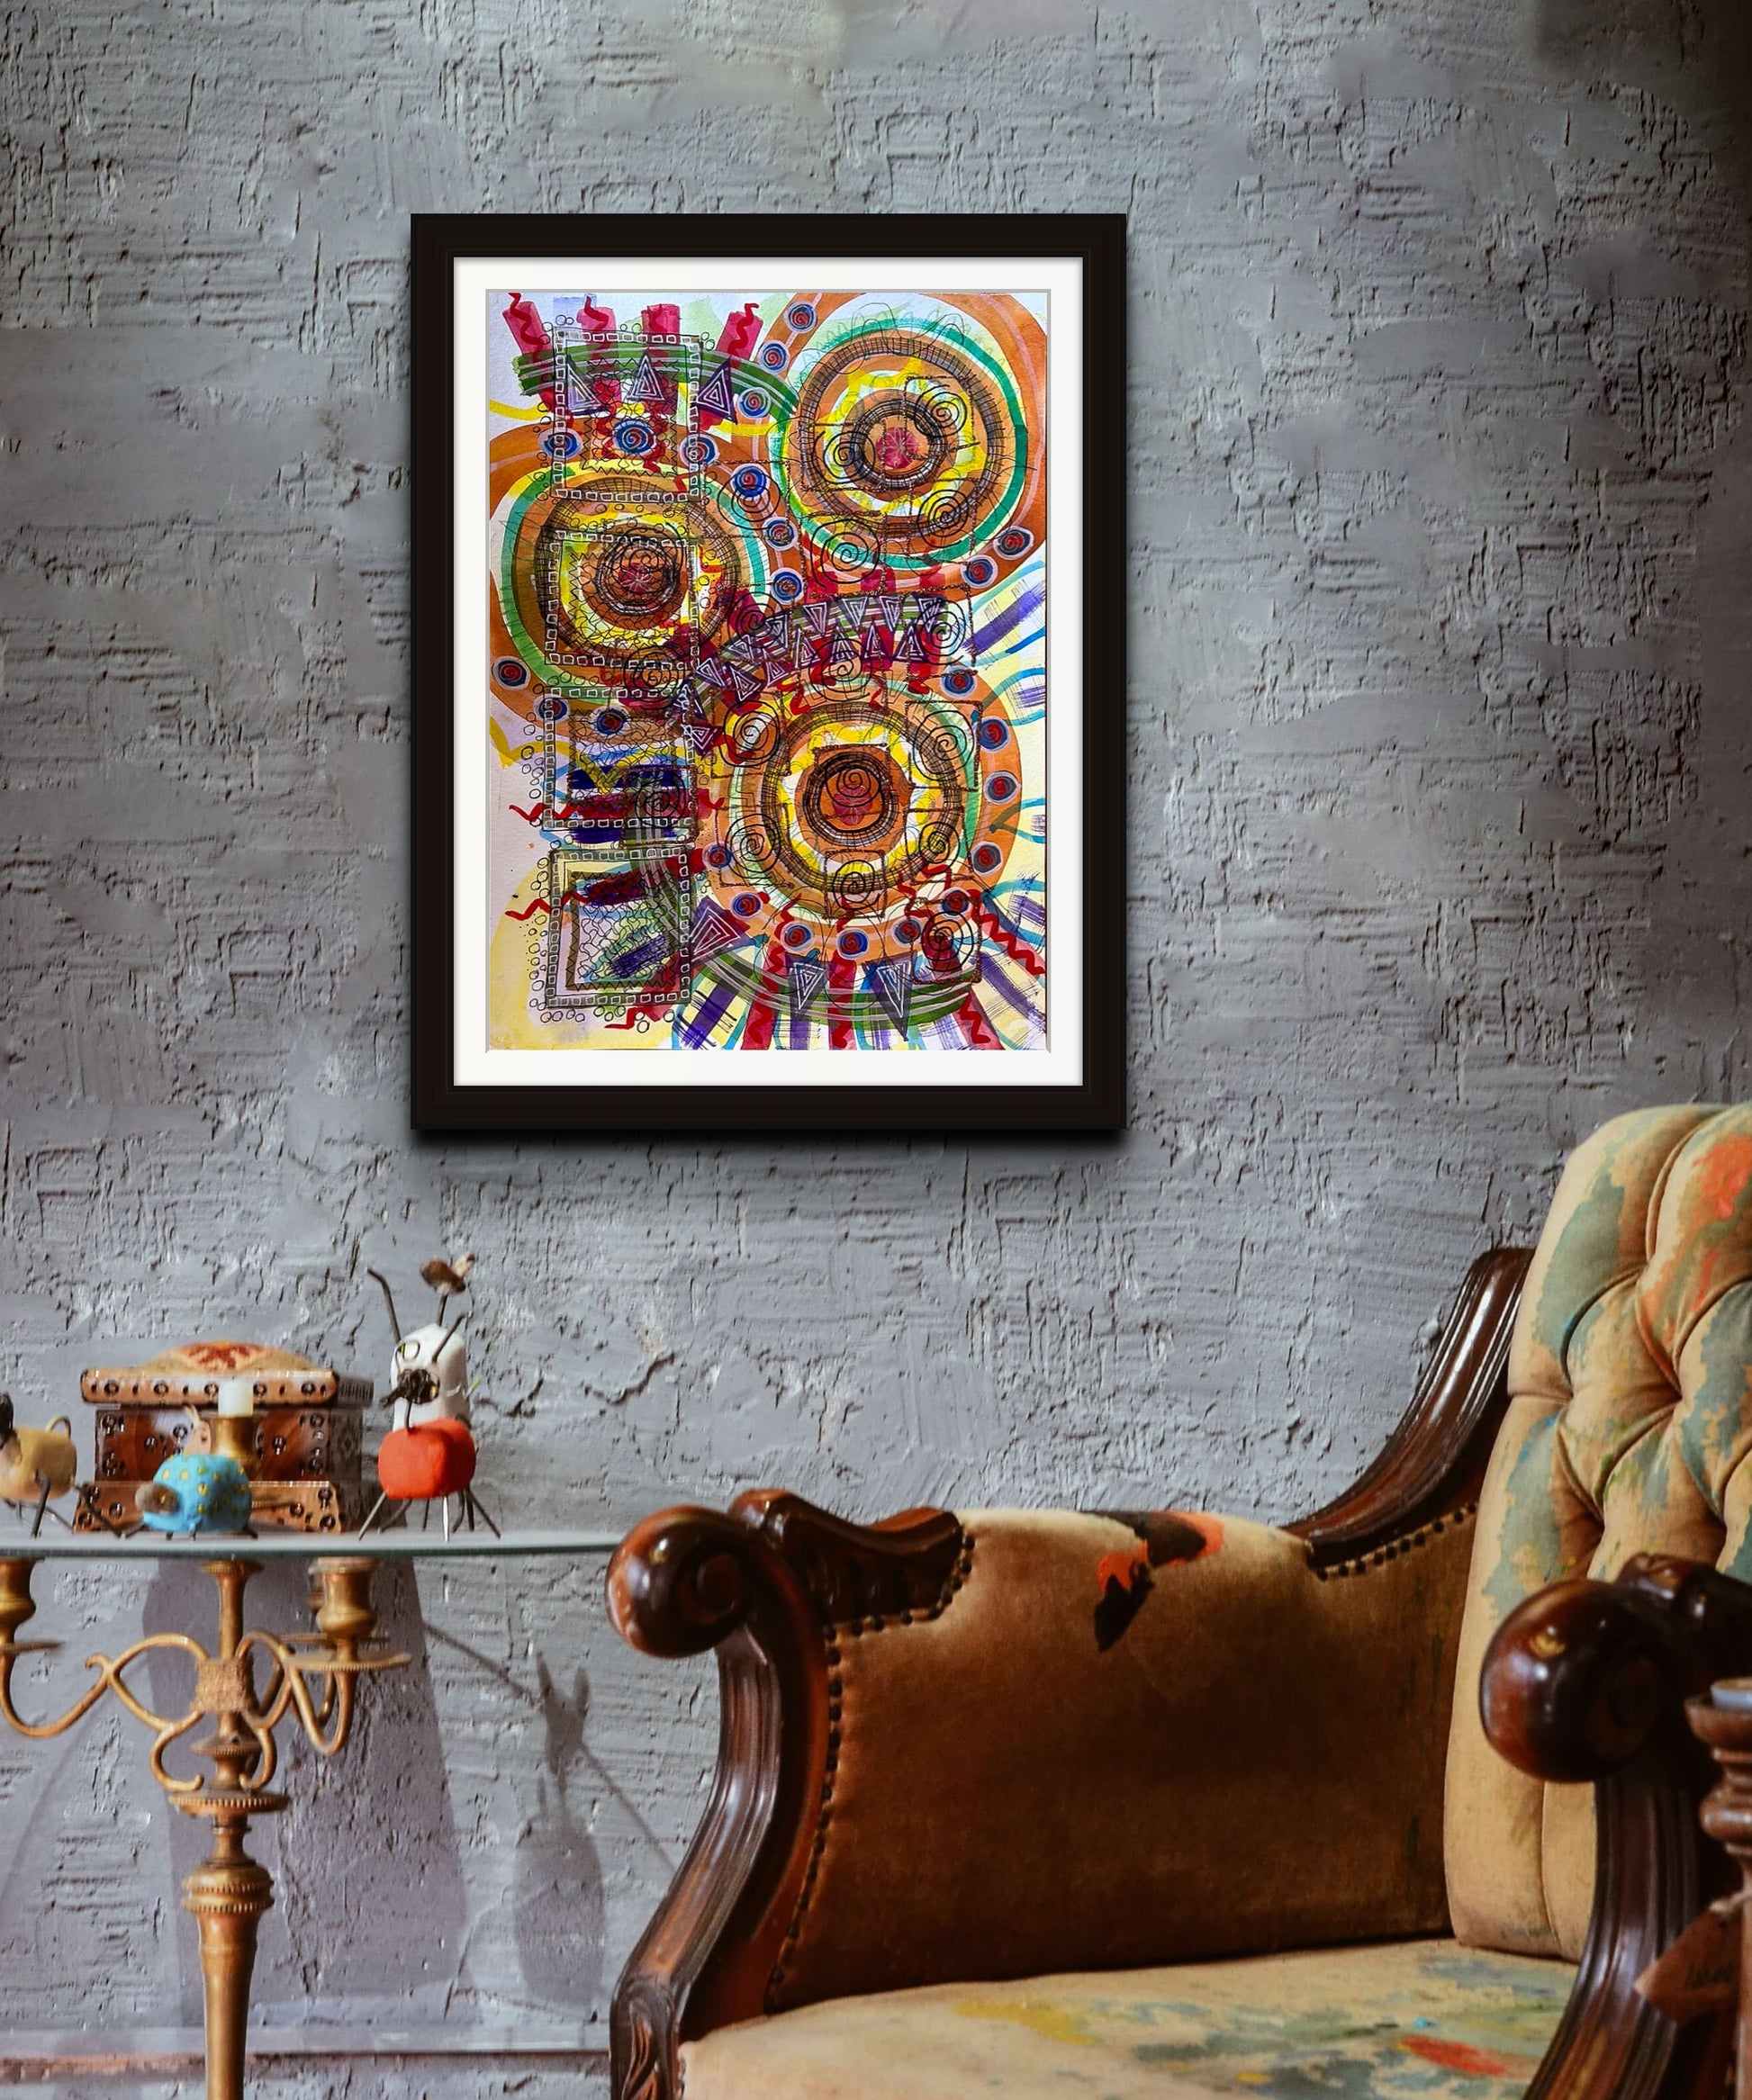 Colorful mixed media abstract and graphic design titled Trilogy by artist Jenifer Hernandez., framed for display only in dark wood and floated on black background.